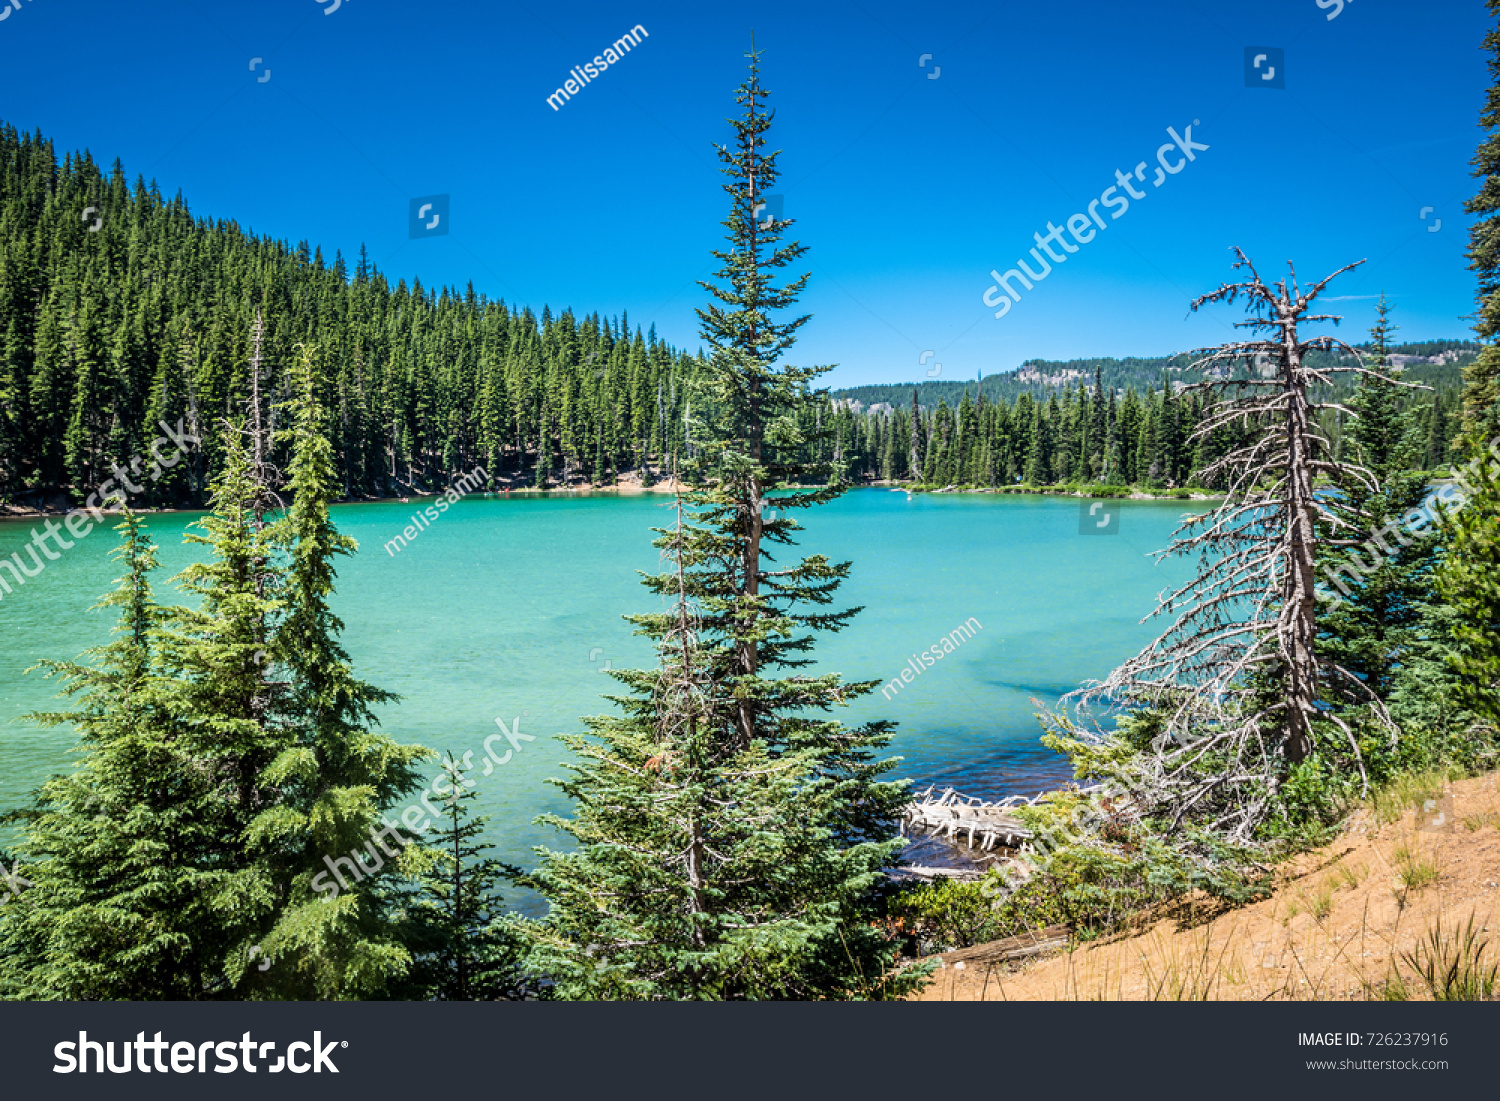 View of Sparks Lake on the Cascade Lakes Scenic Byway in Bend Oregon in Deschutes County. The lake has a natural teal green blue color from glacial sediments  #726237916